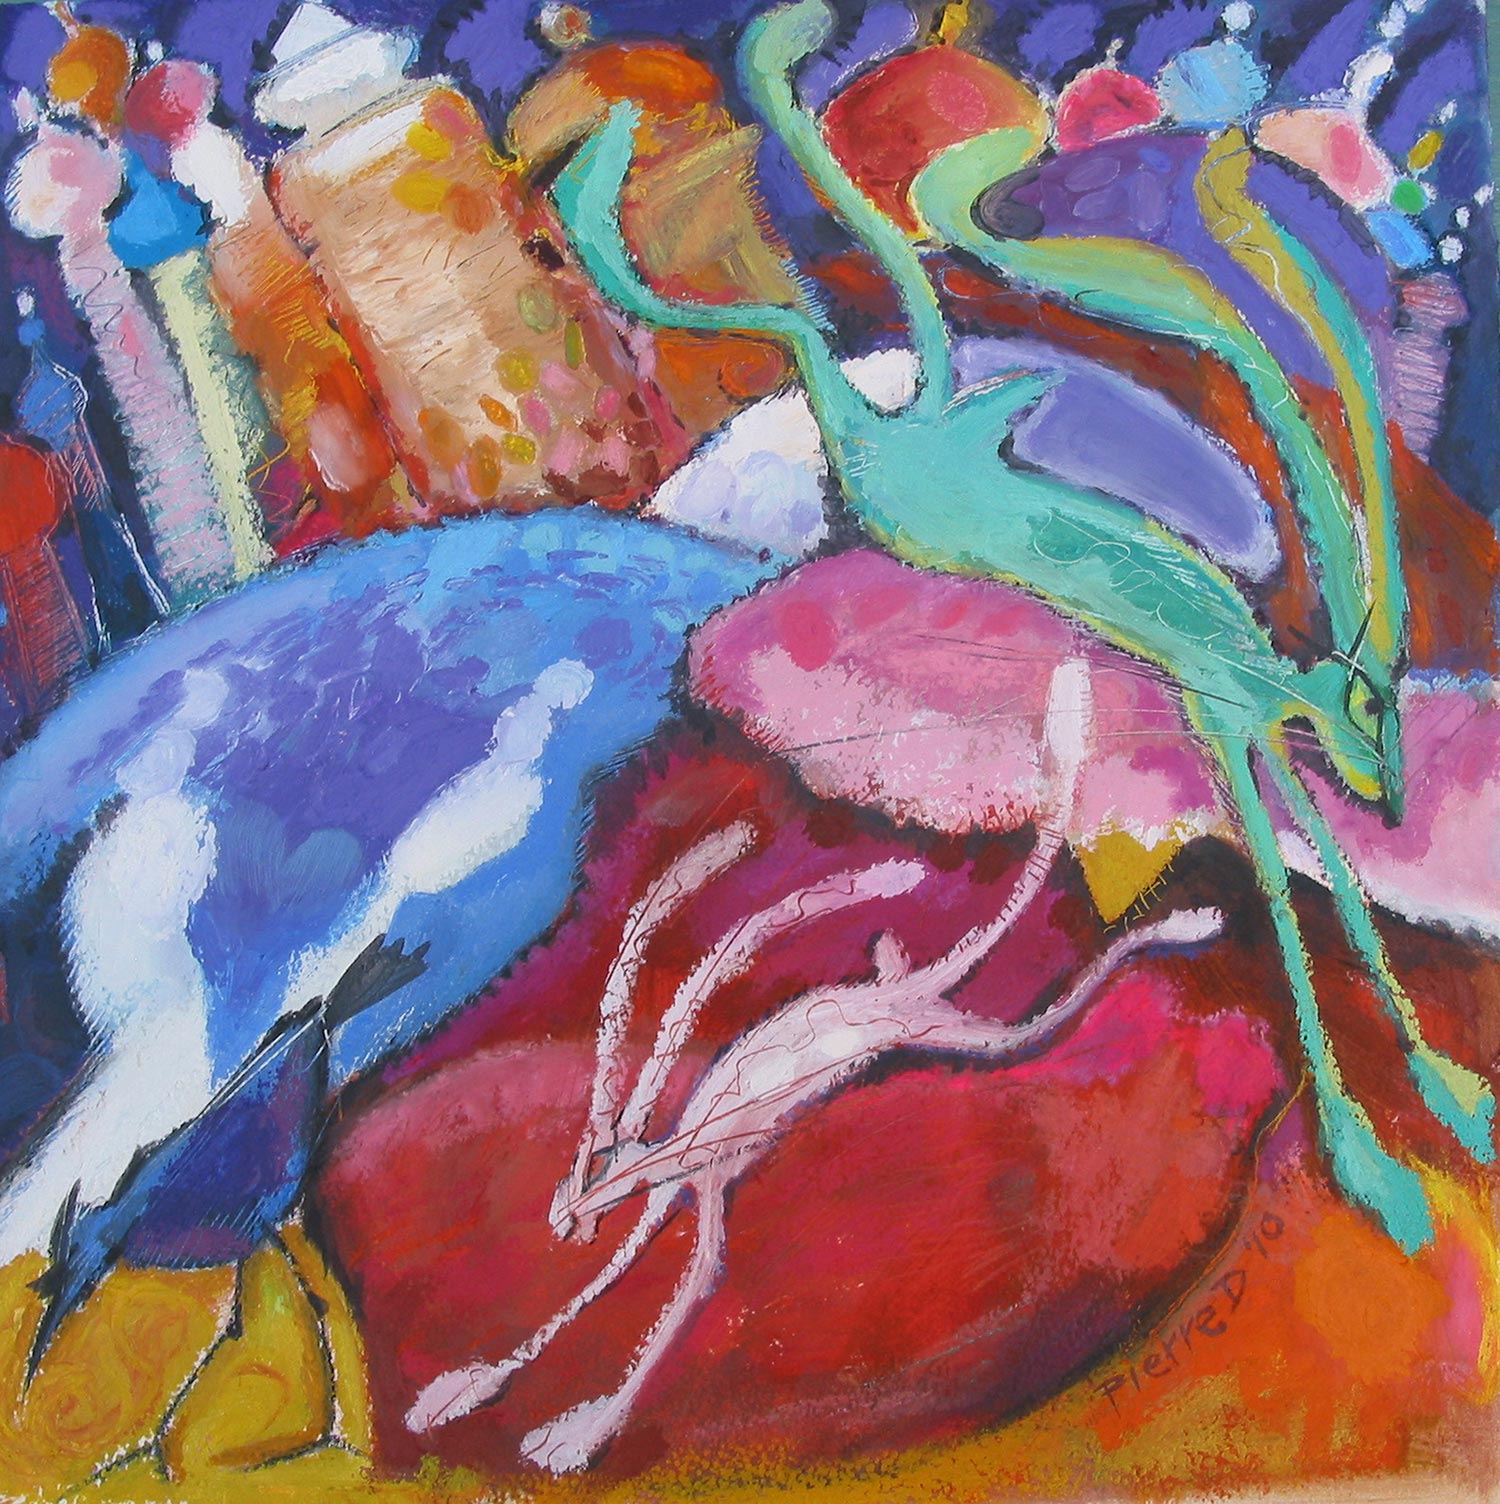  Wassilly Hare &nbsp; ©  Oil and oil pastel on fine paper  38 cm high x 38 cm wide  "Silly and Wassily, both. The early Kandinsky influence is all too present in the landscape, and admitedly, there's also something of Chagall there..." 